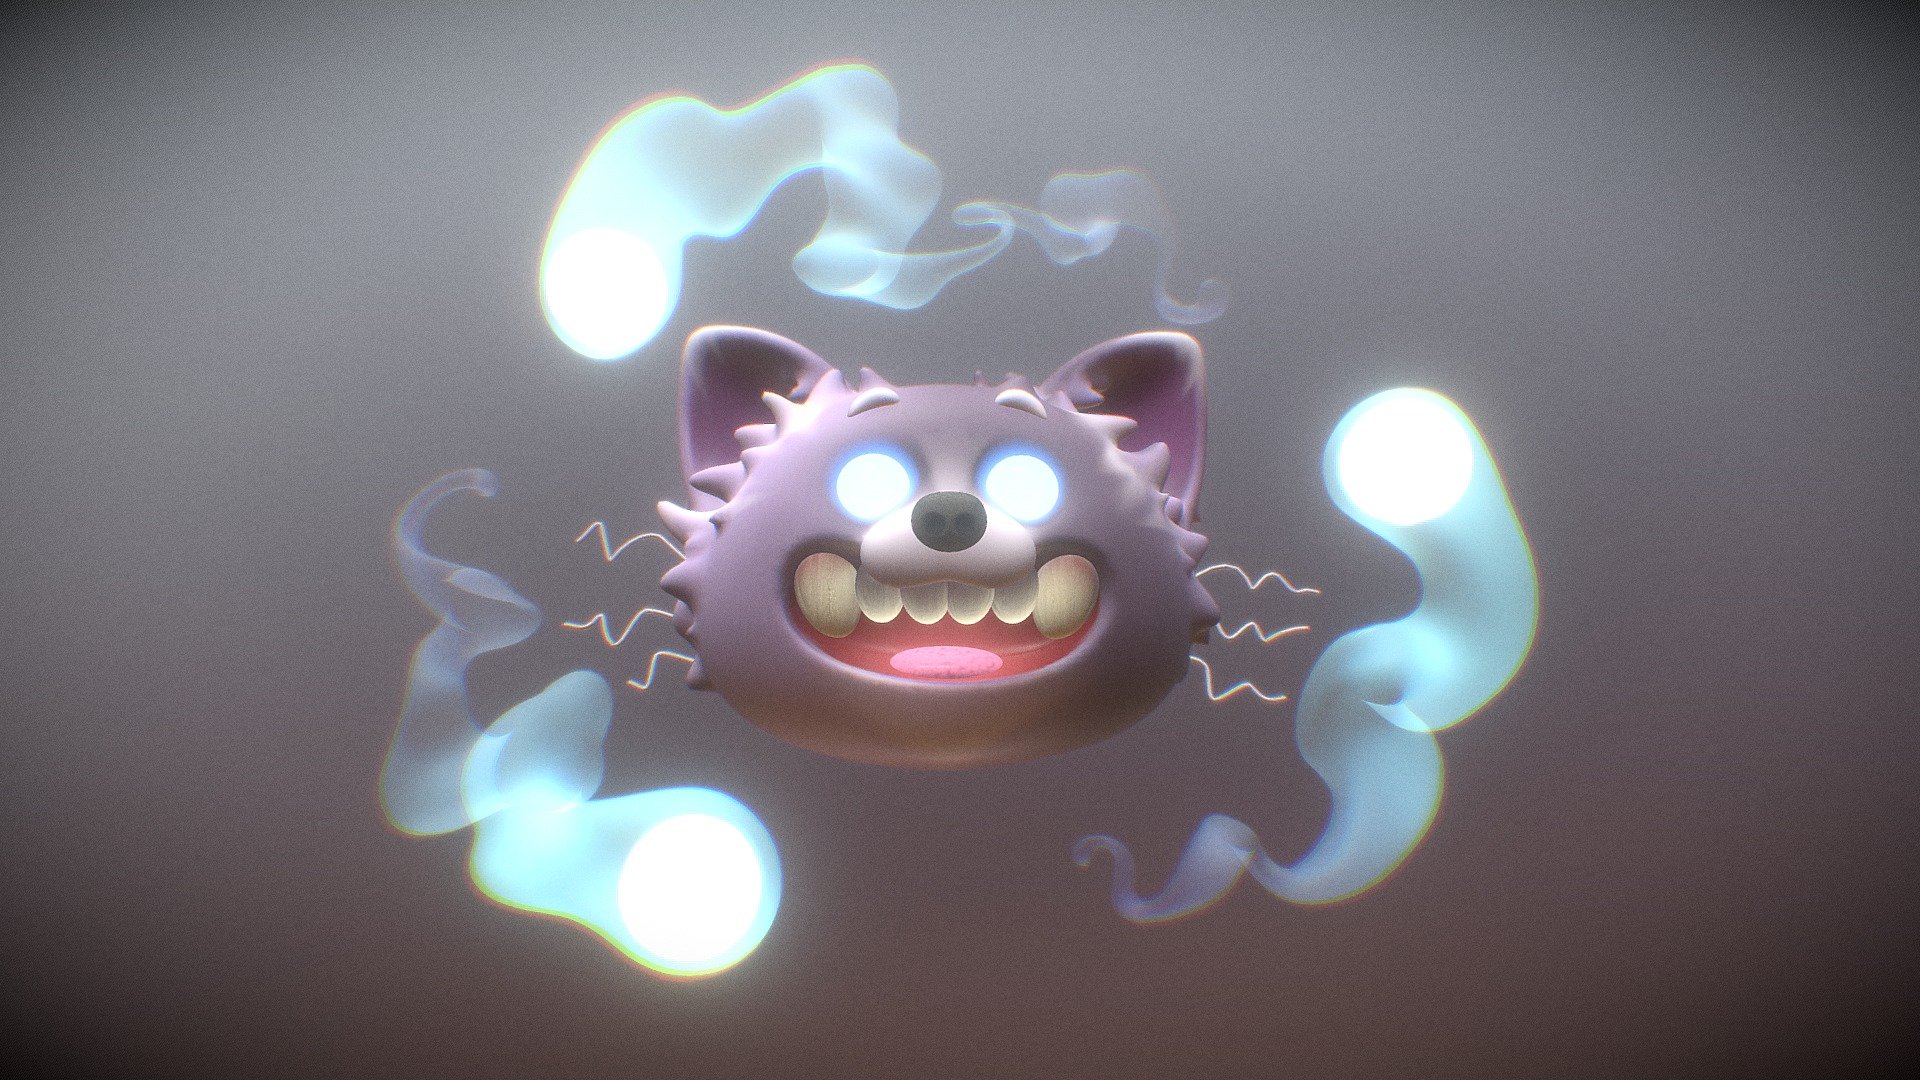 This is what happens if you let him into the bag of magic orbs. Better go hide until it wears off.
My first sculpt in blender! Made for the sketchfab weekly challenge &ldquo;Wizard/Witch